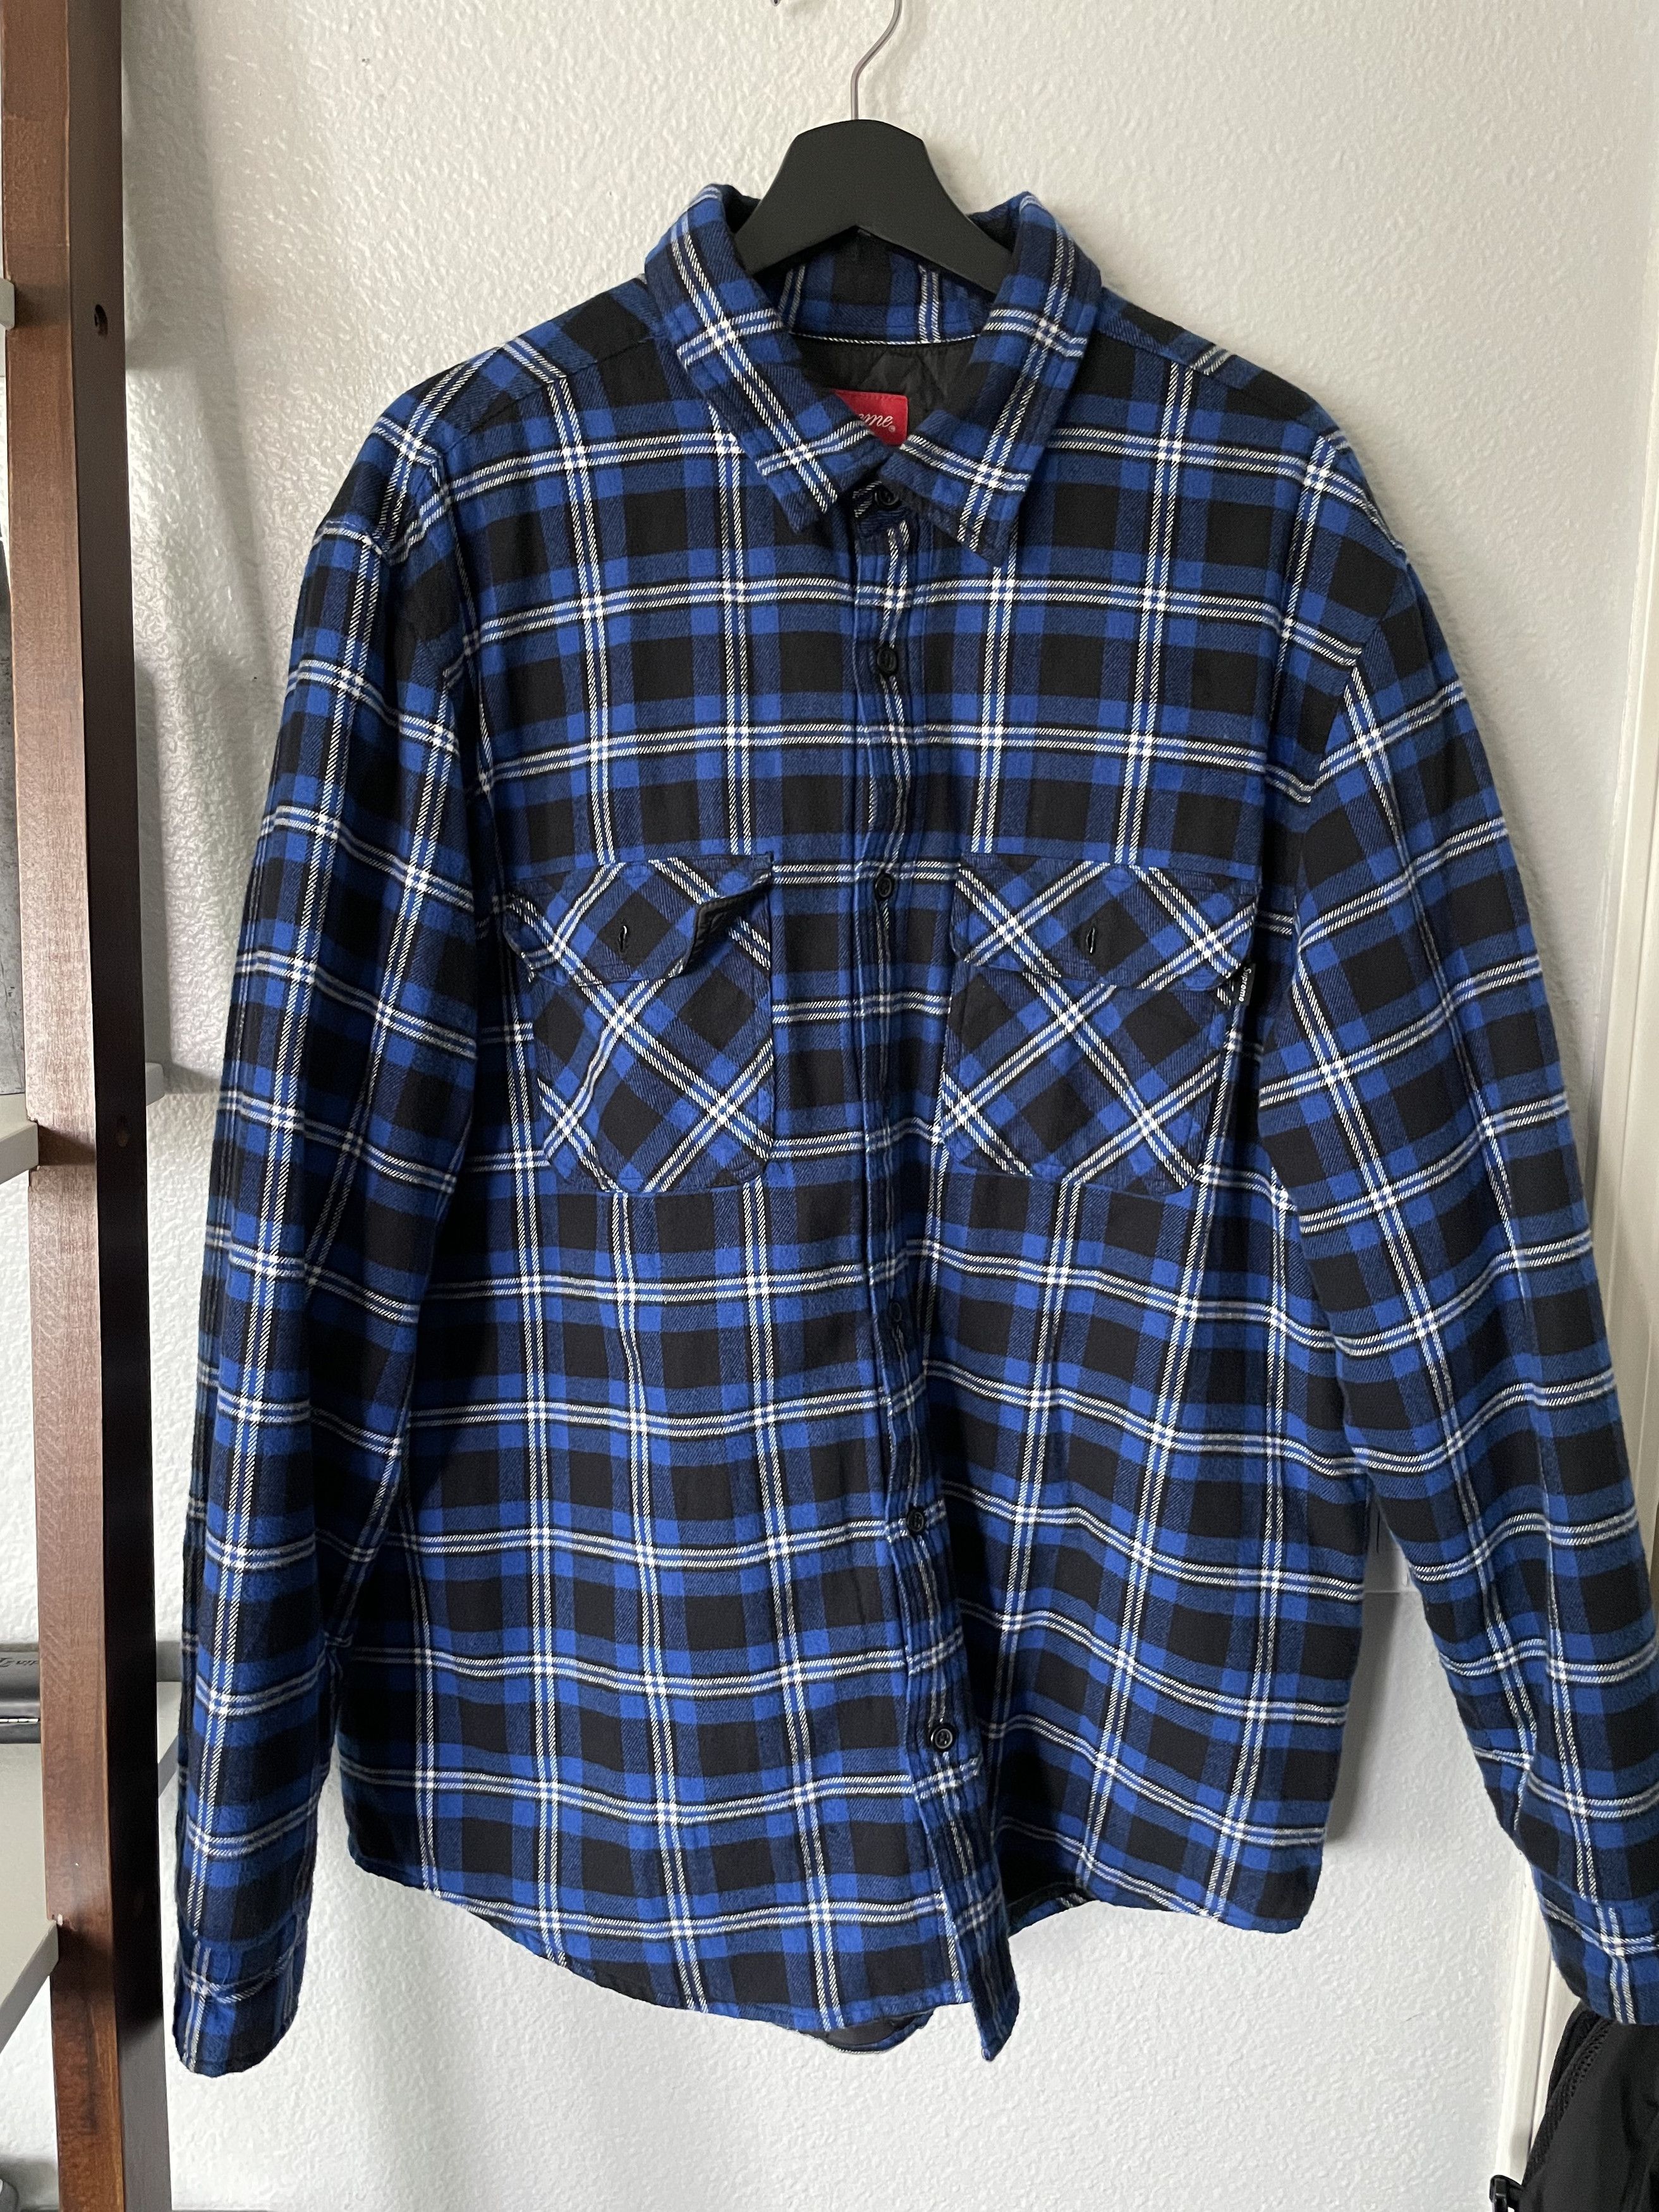 Supreme Arc Logo Quilted Flannel Shirt | Grailed